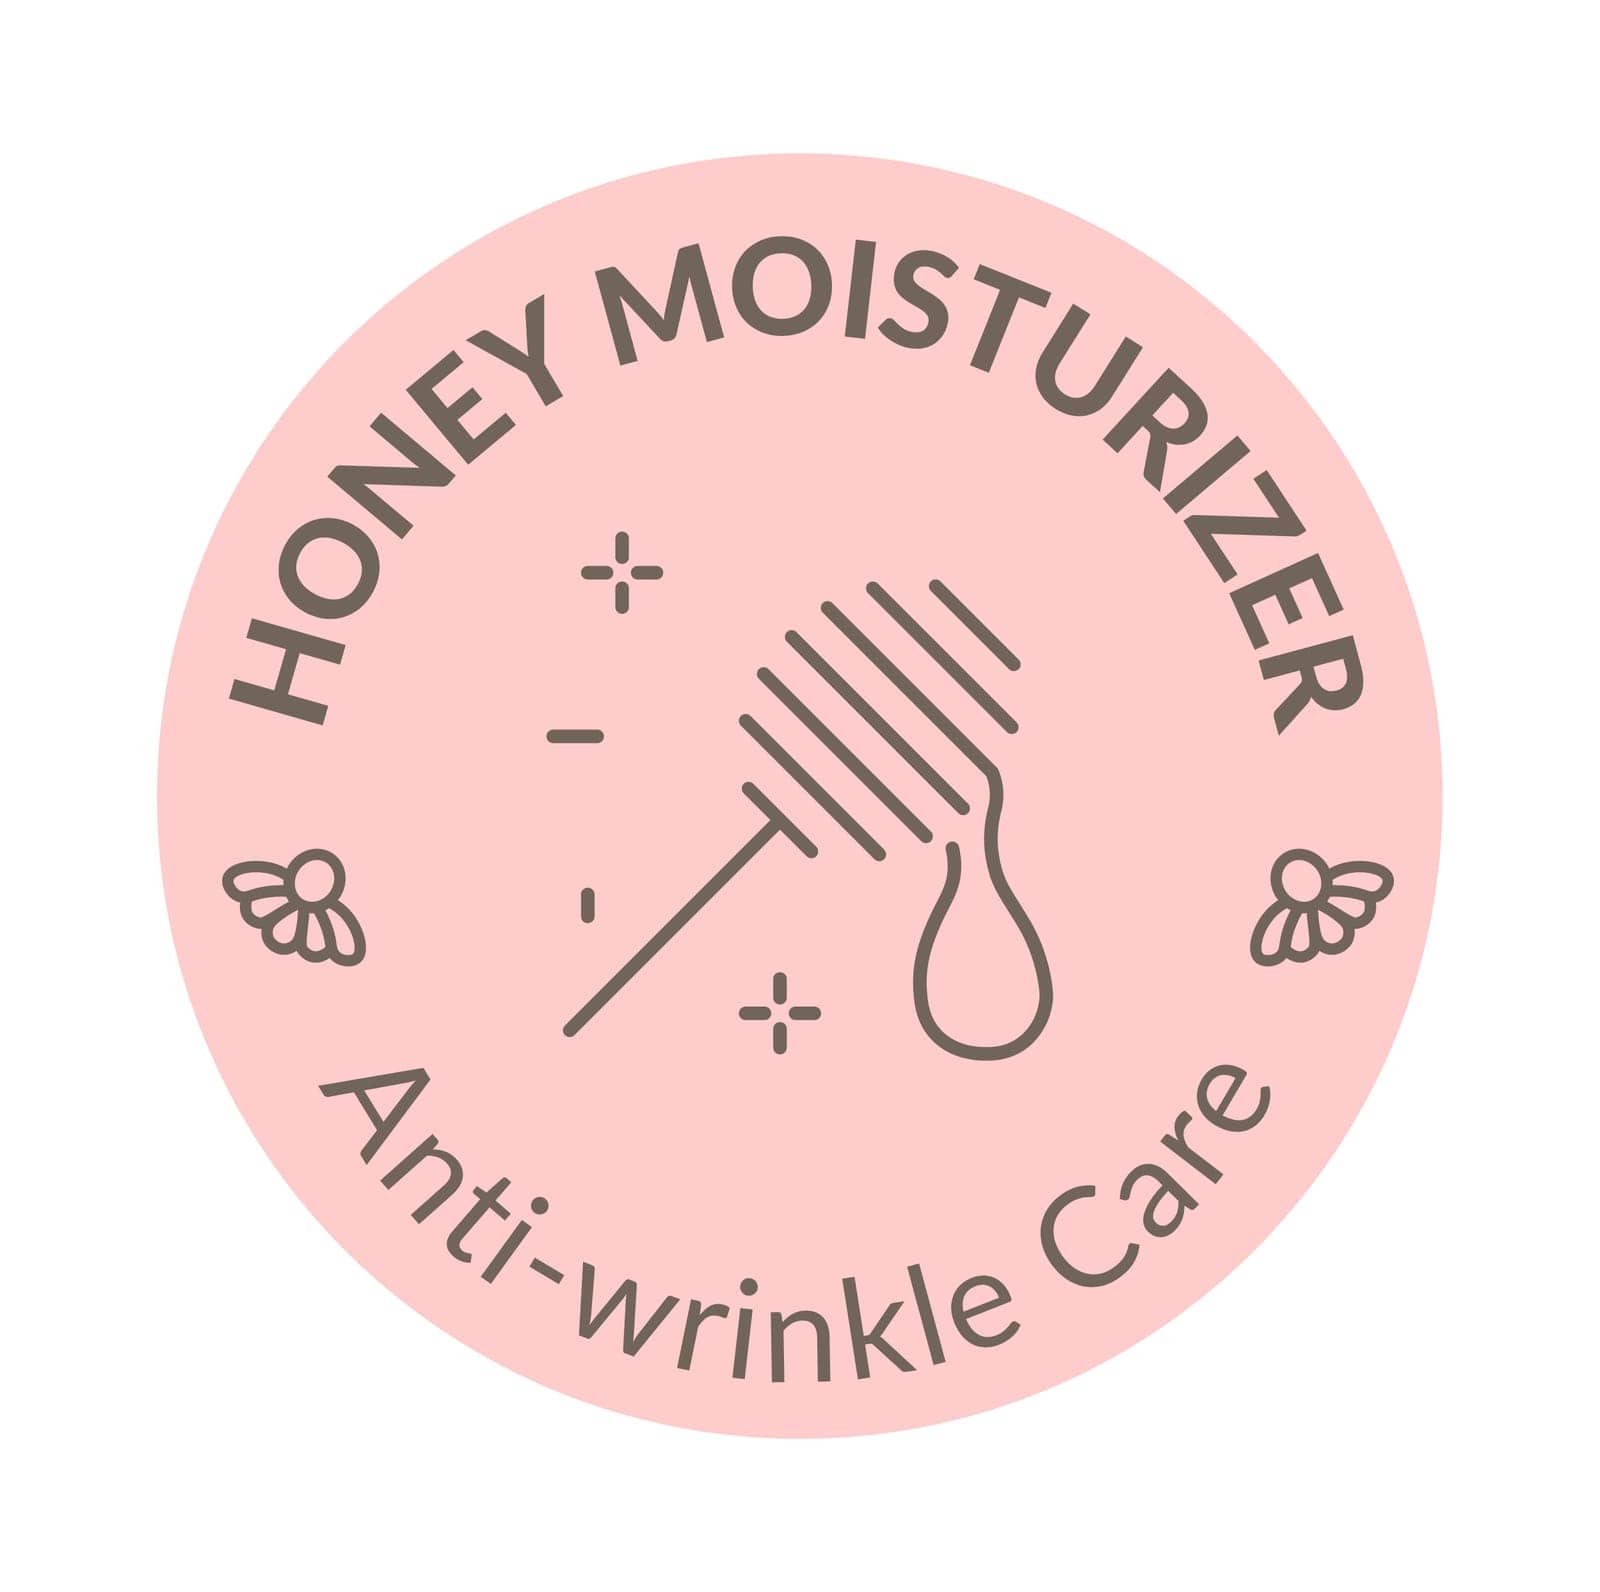 Anti wrinkle care, isolated honey moisturizer. Honey moisturizer, natural and organic treatment for face and skin, spa salon or products in shop. Label or emblem for package. Vector in flat style